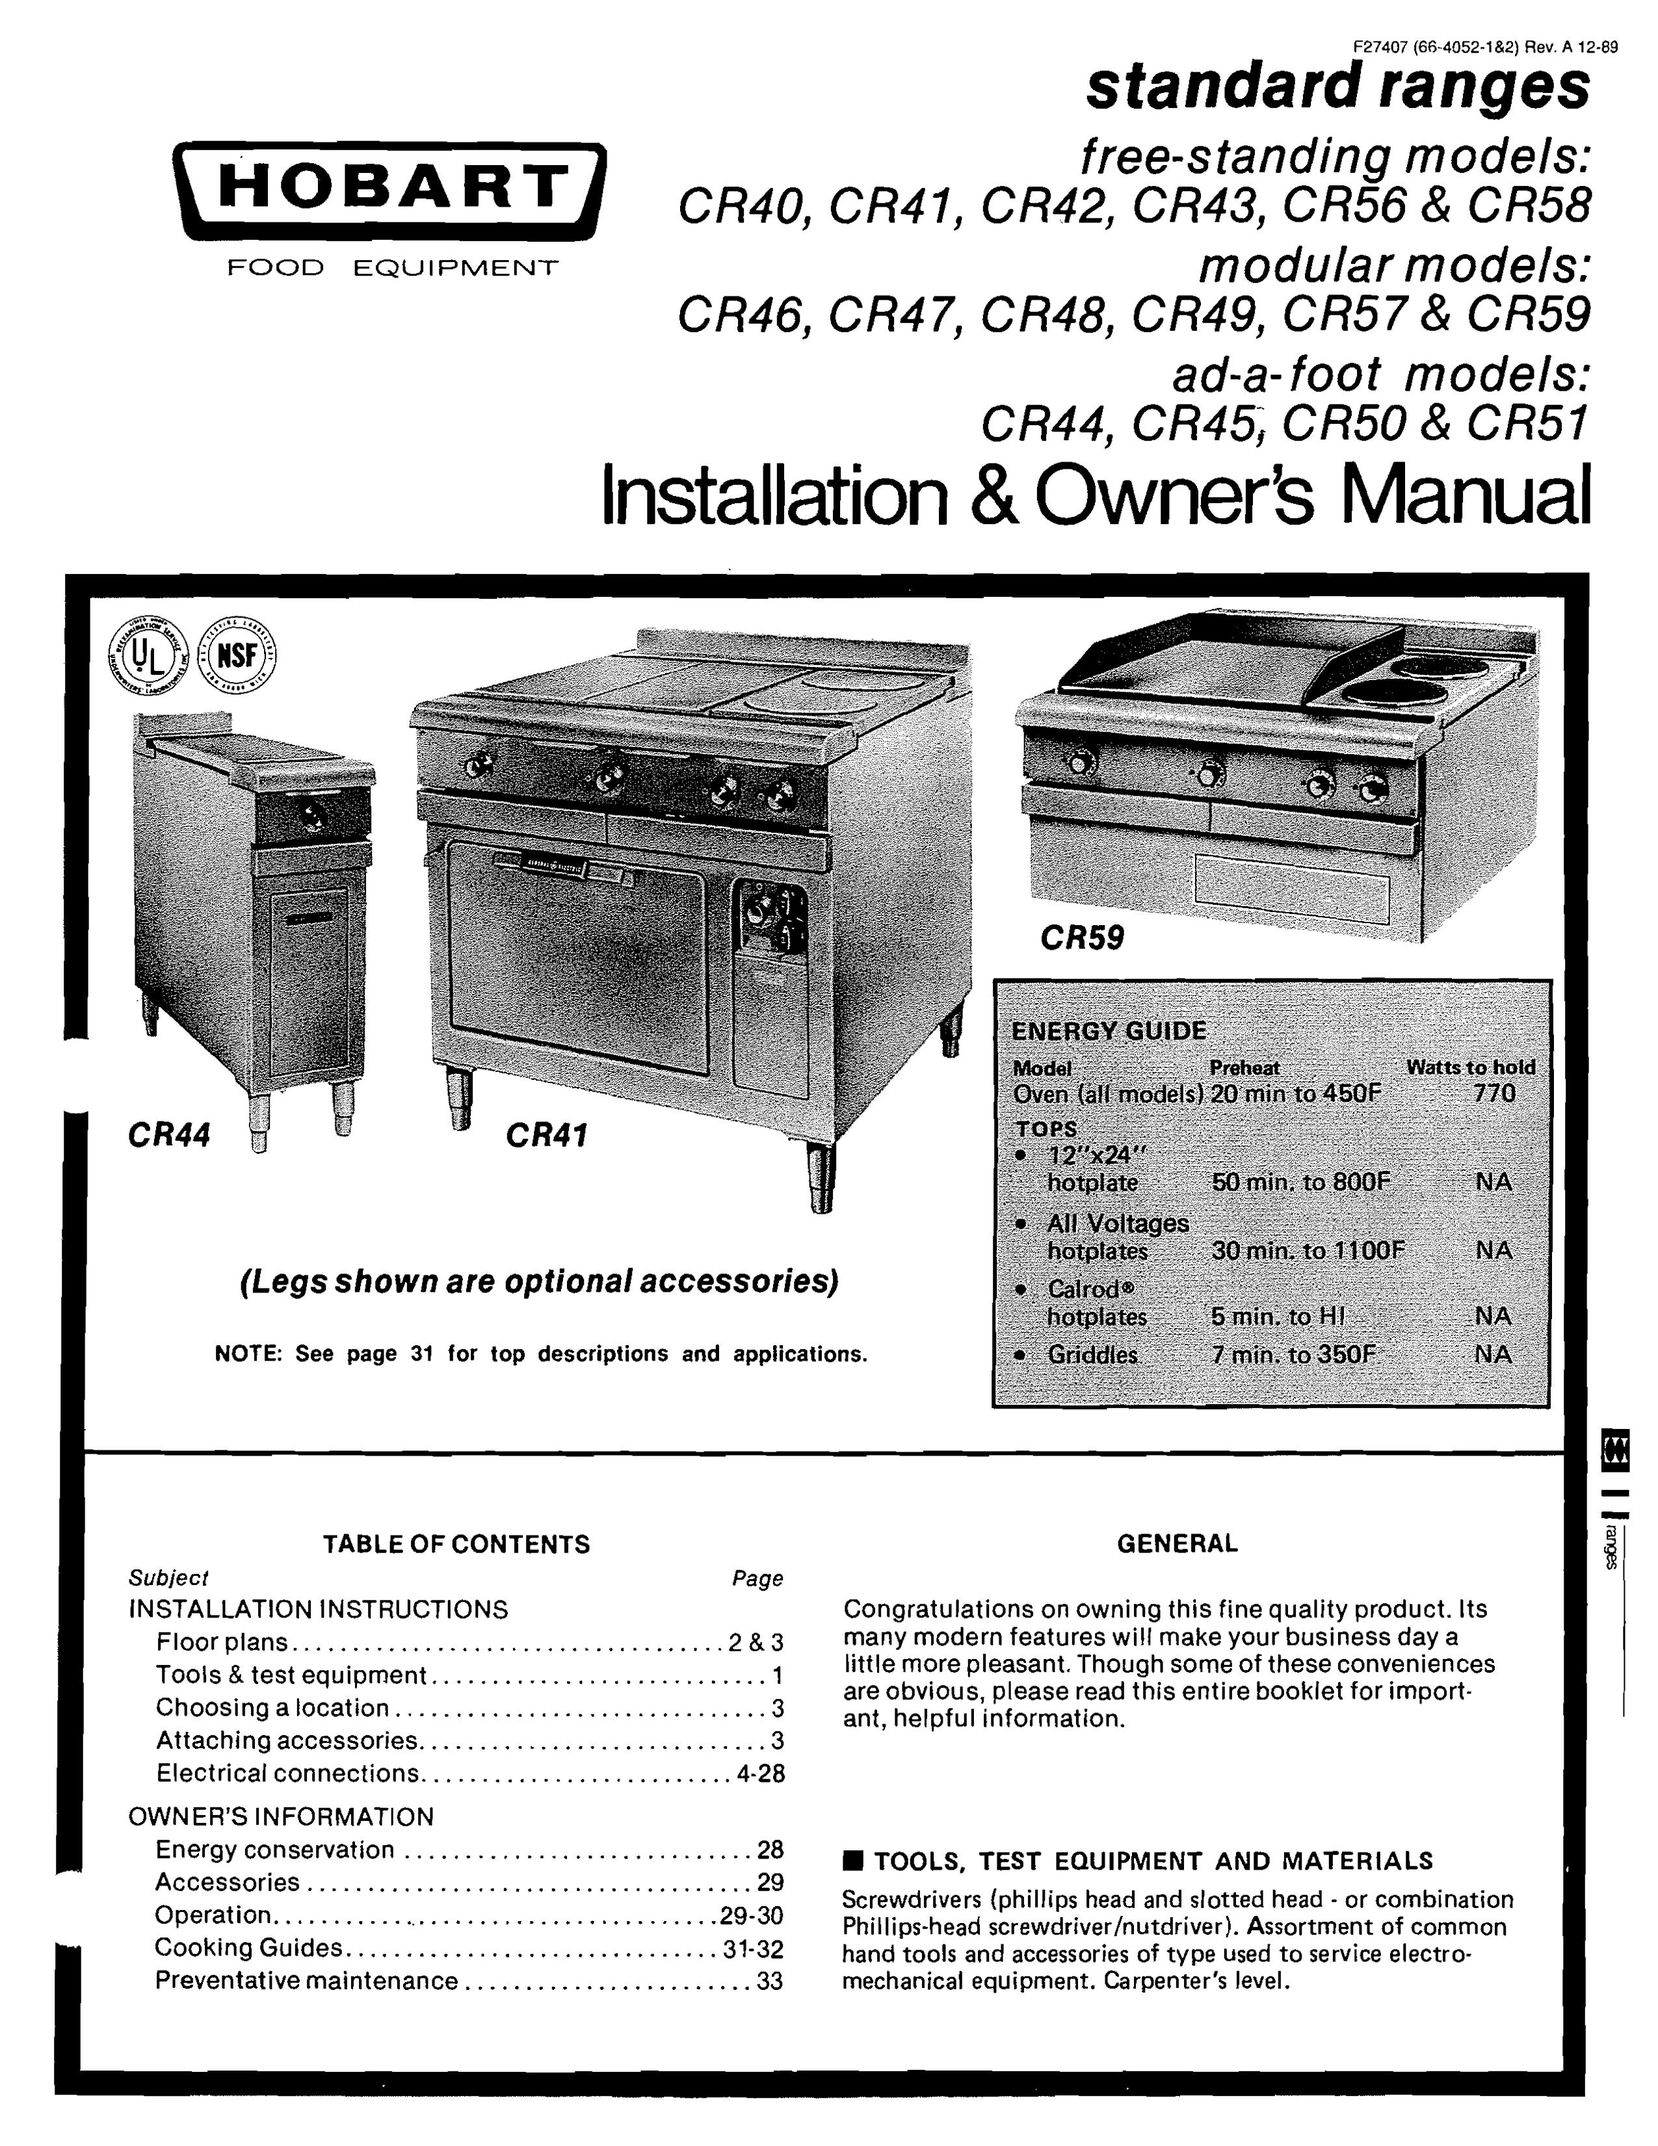 Hobart CR-41 Double Oven User Manual